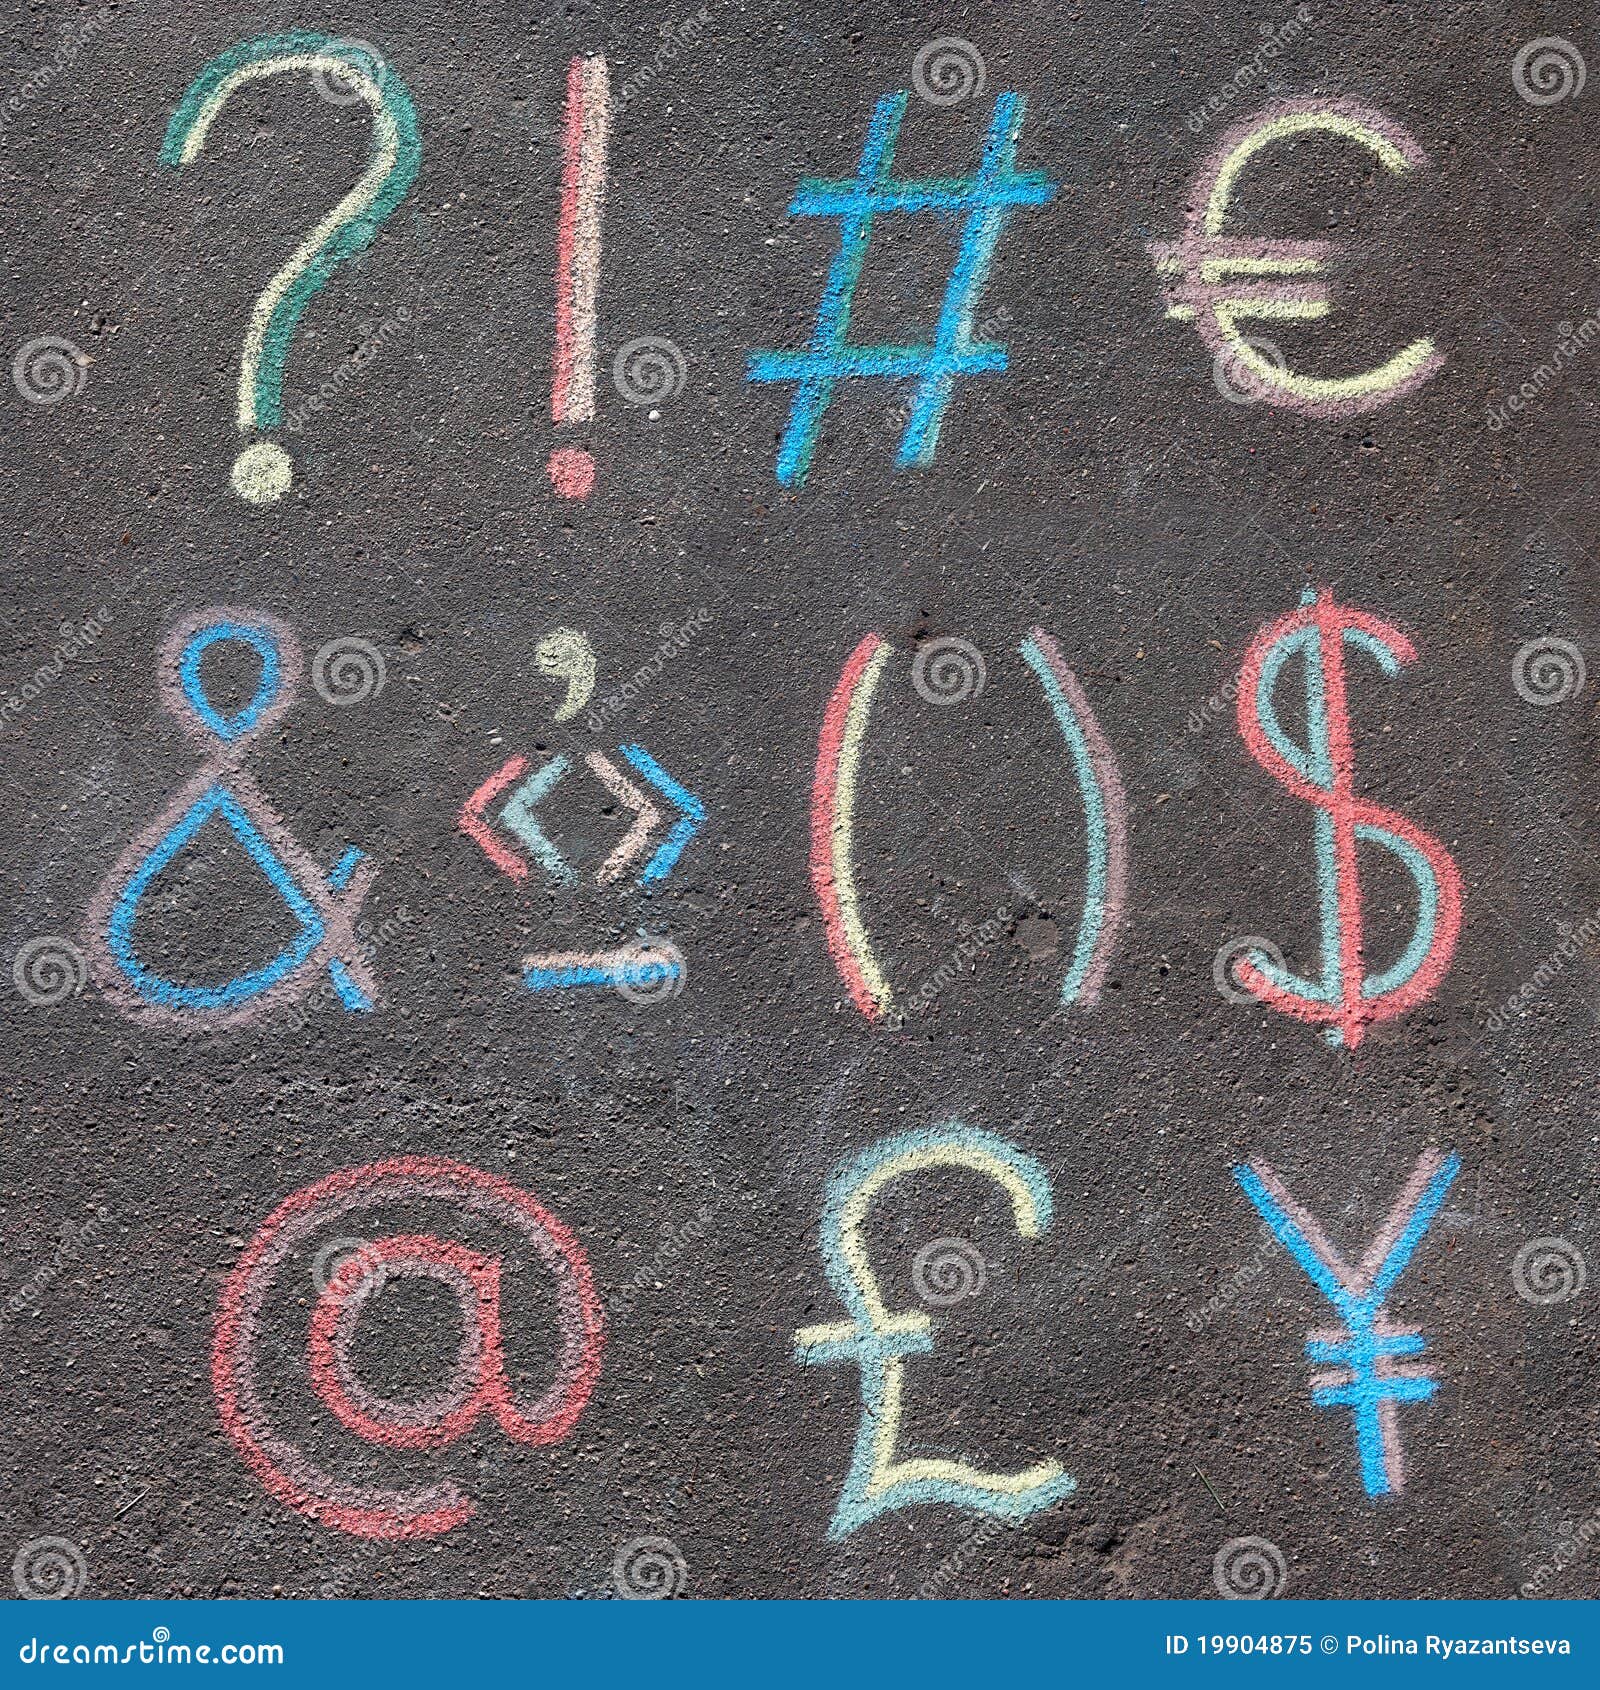 punctuation marks, mathematical & currency s